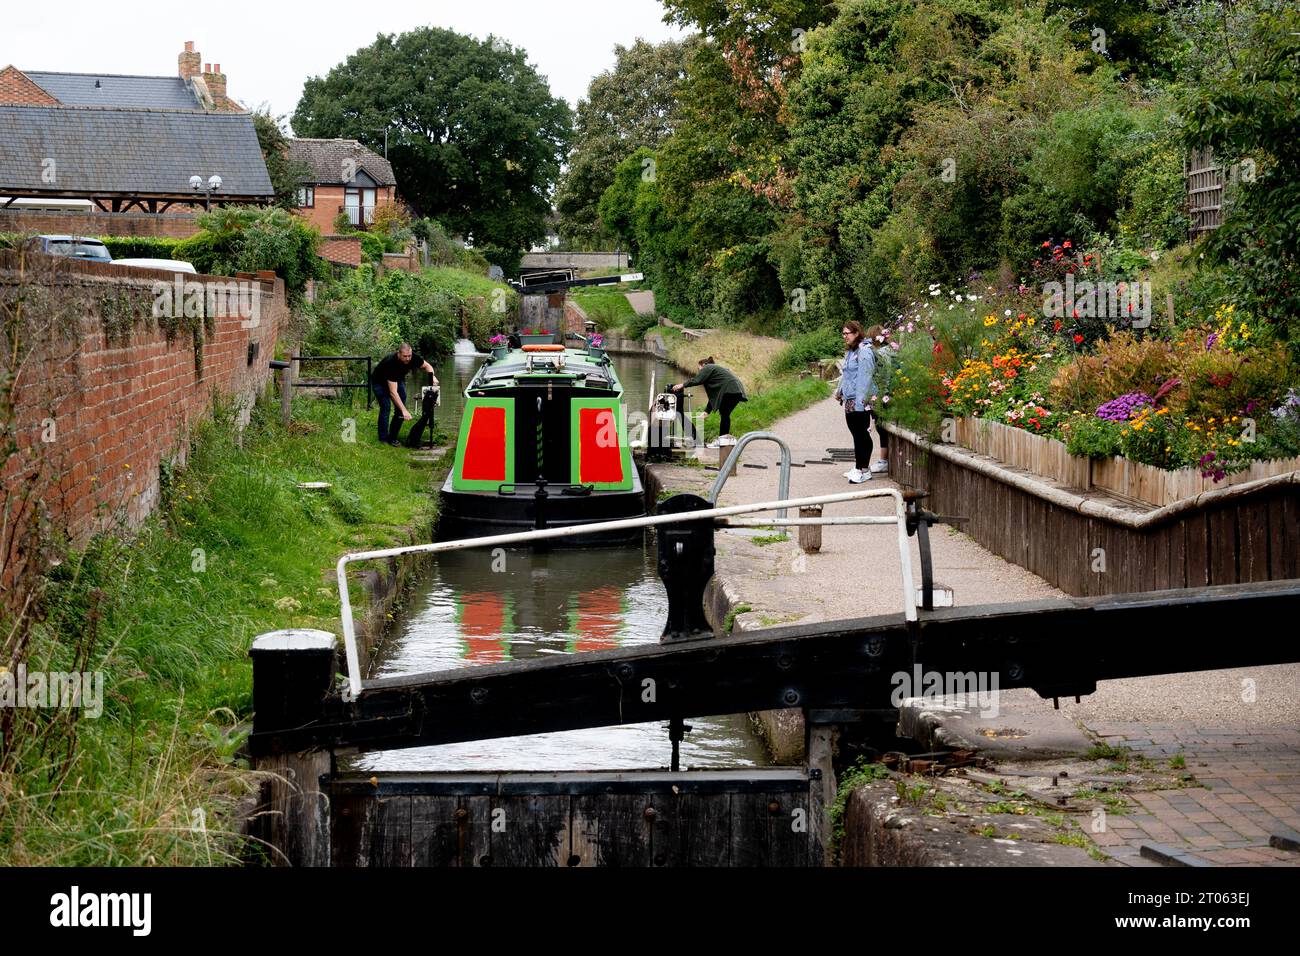 A narrowboat in a canal lock in Stratford-upon-Avon town centre, Warwickshire, England, UK Stock Photo